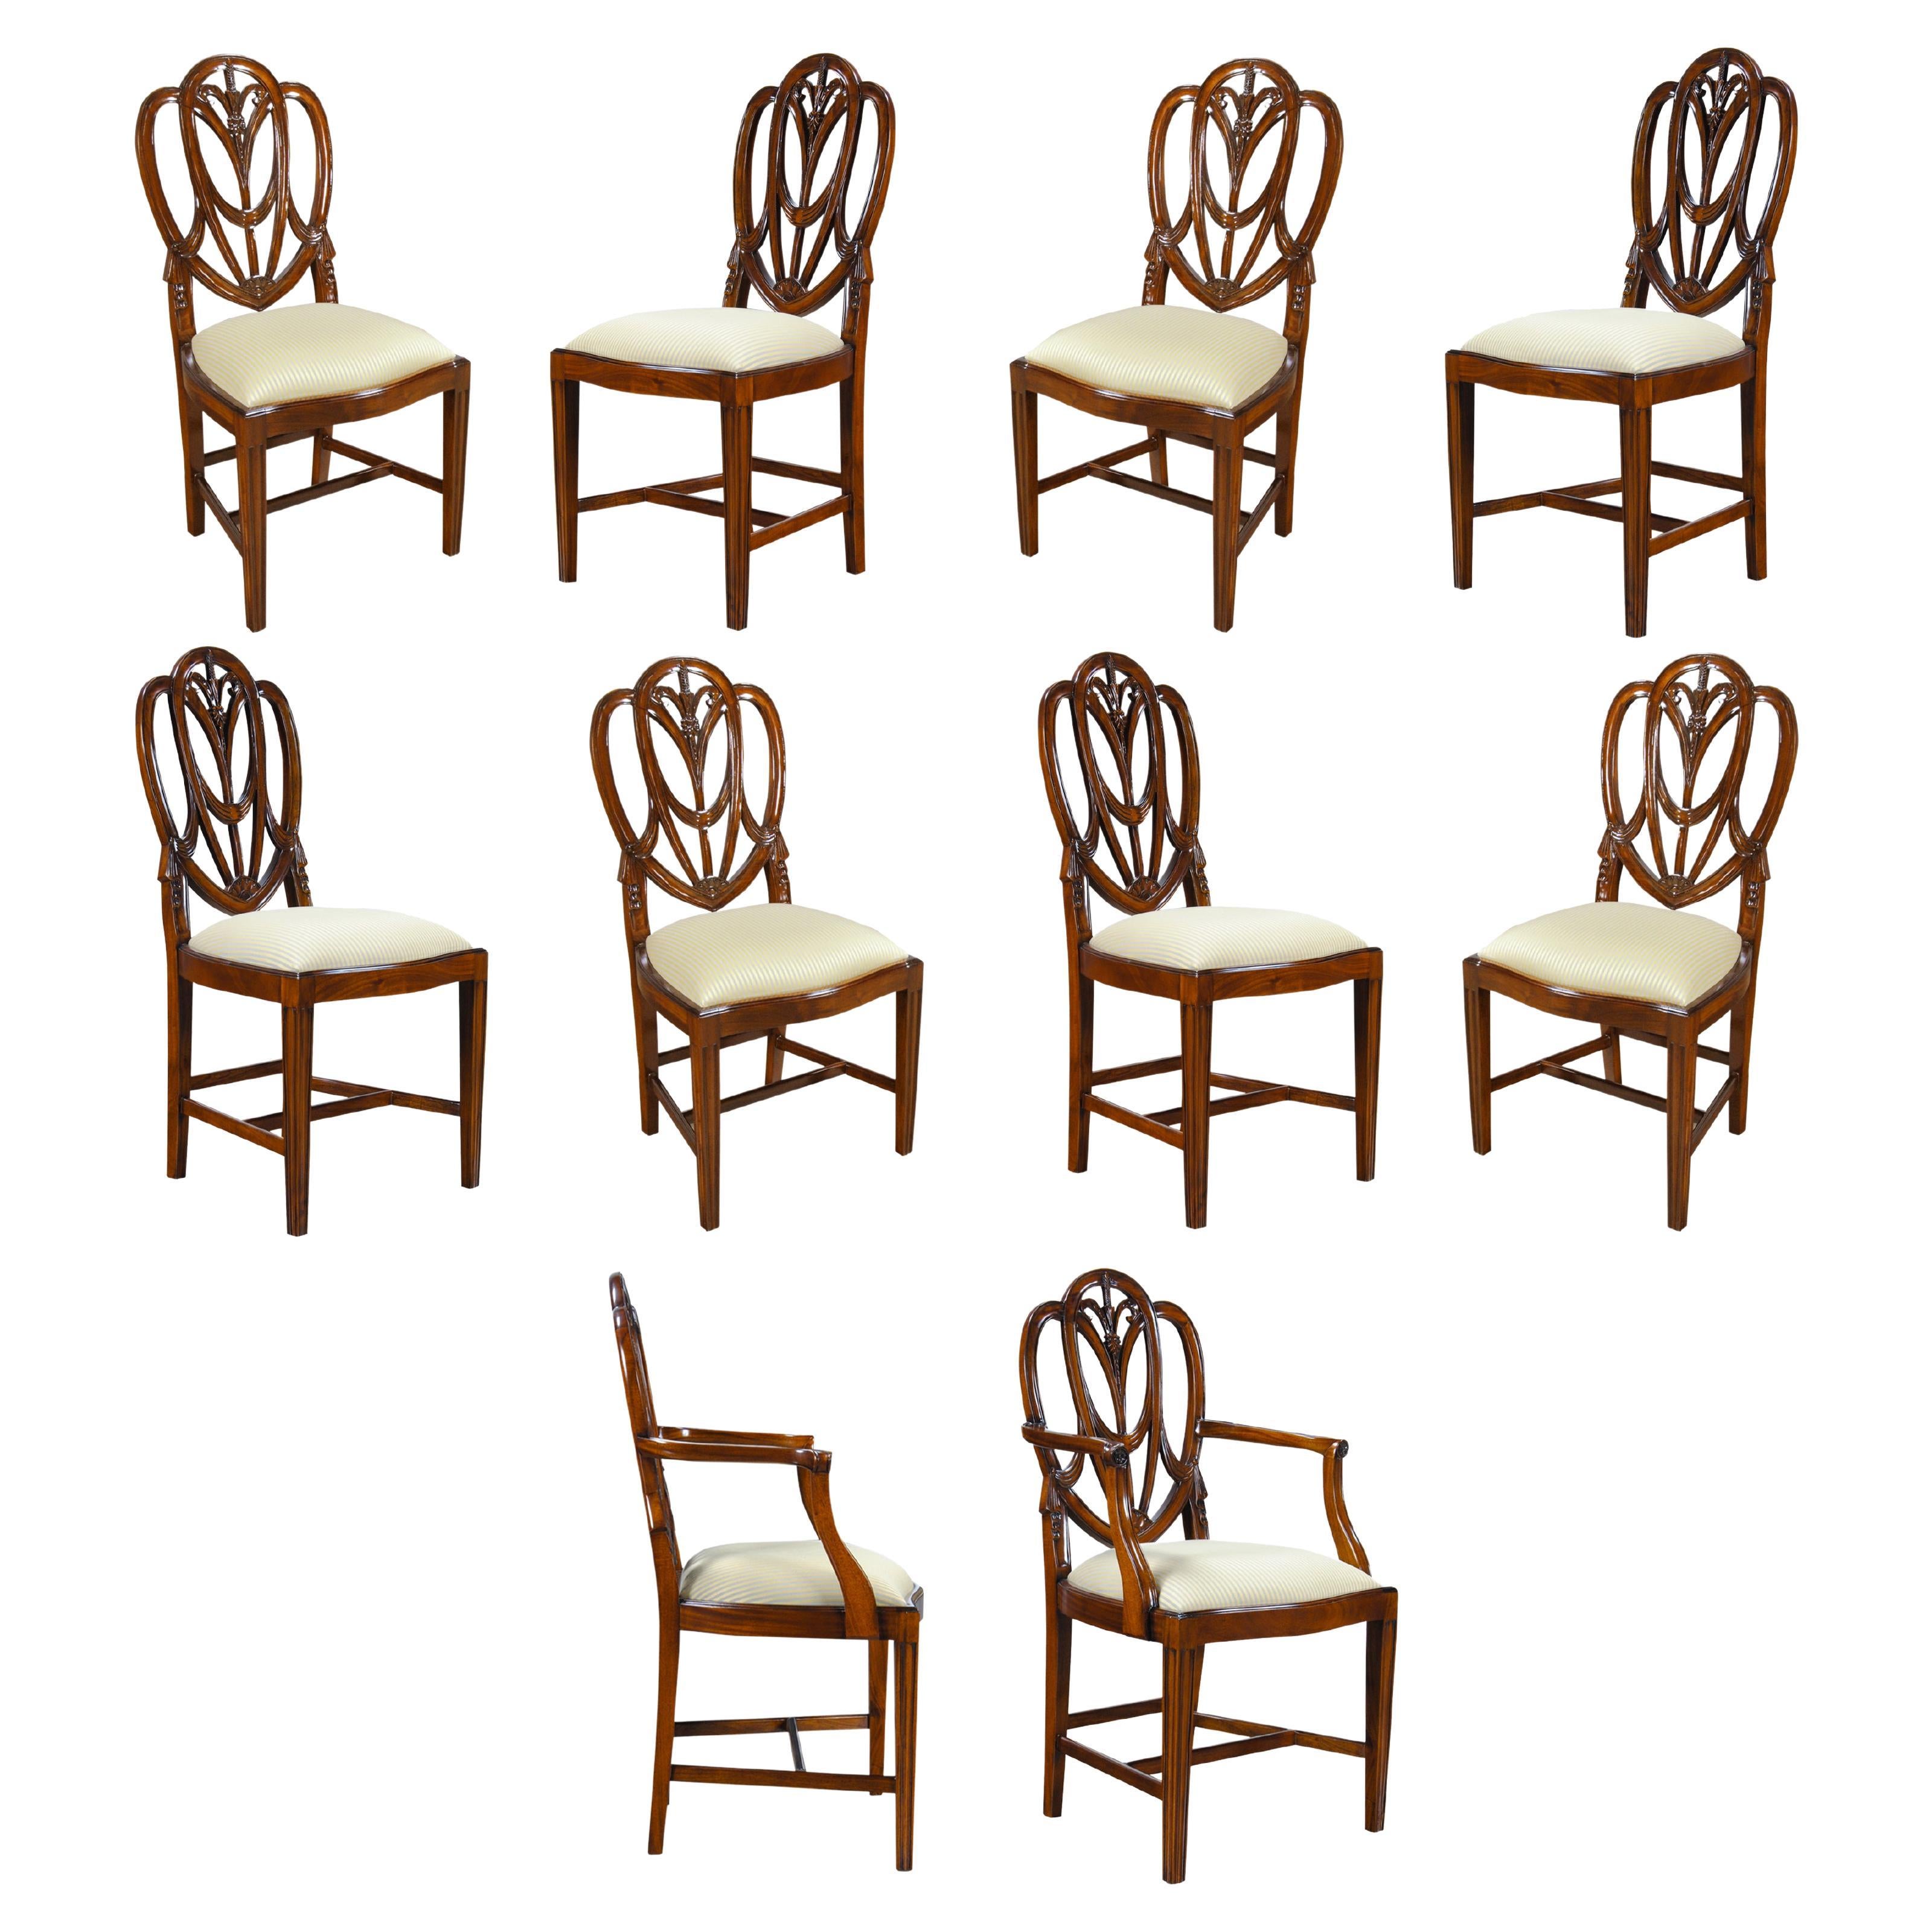 Sweet Heart Dining Chairs, Set of 10 For Sale